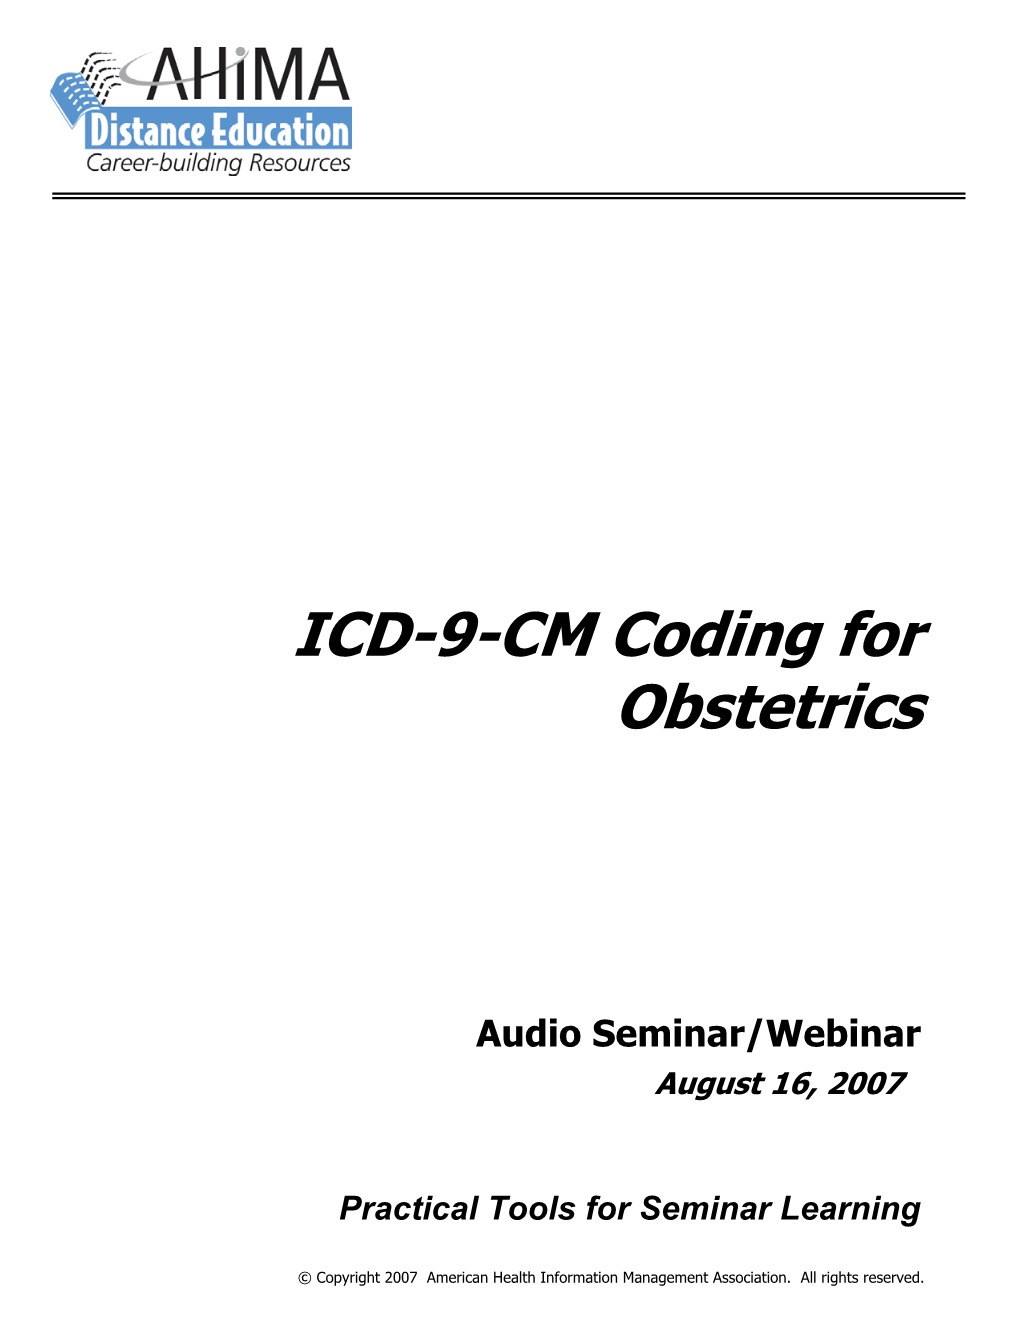 ICD-9-CM Coding for Obstetrics